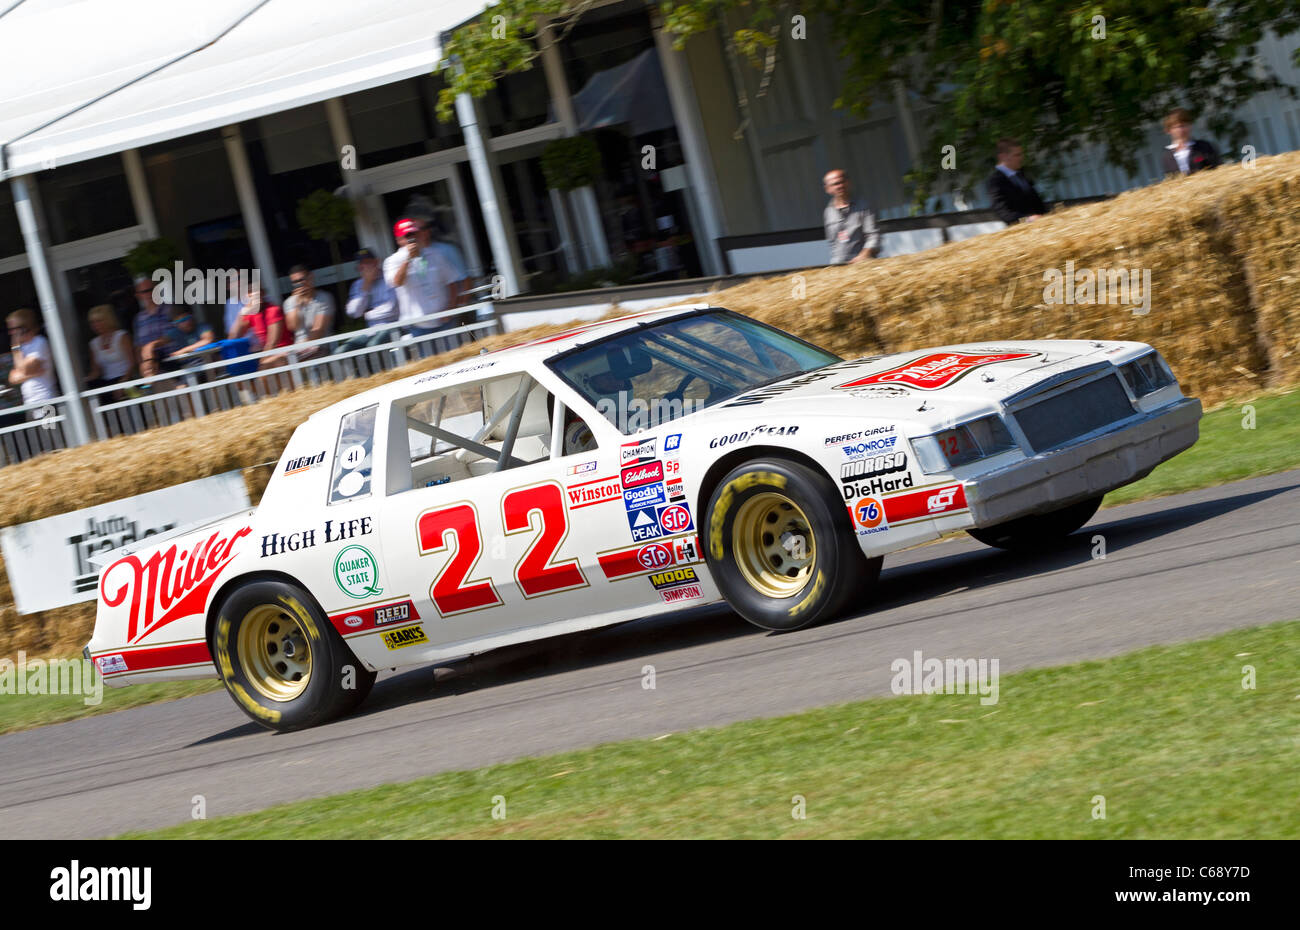 1983 Buick Regal 'notchback' NASCAR racer at the 2011 Goodwood Festival of Speed, Sussex, UK. Stock Photo